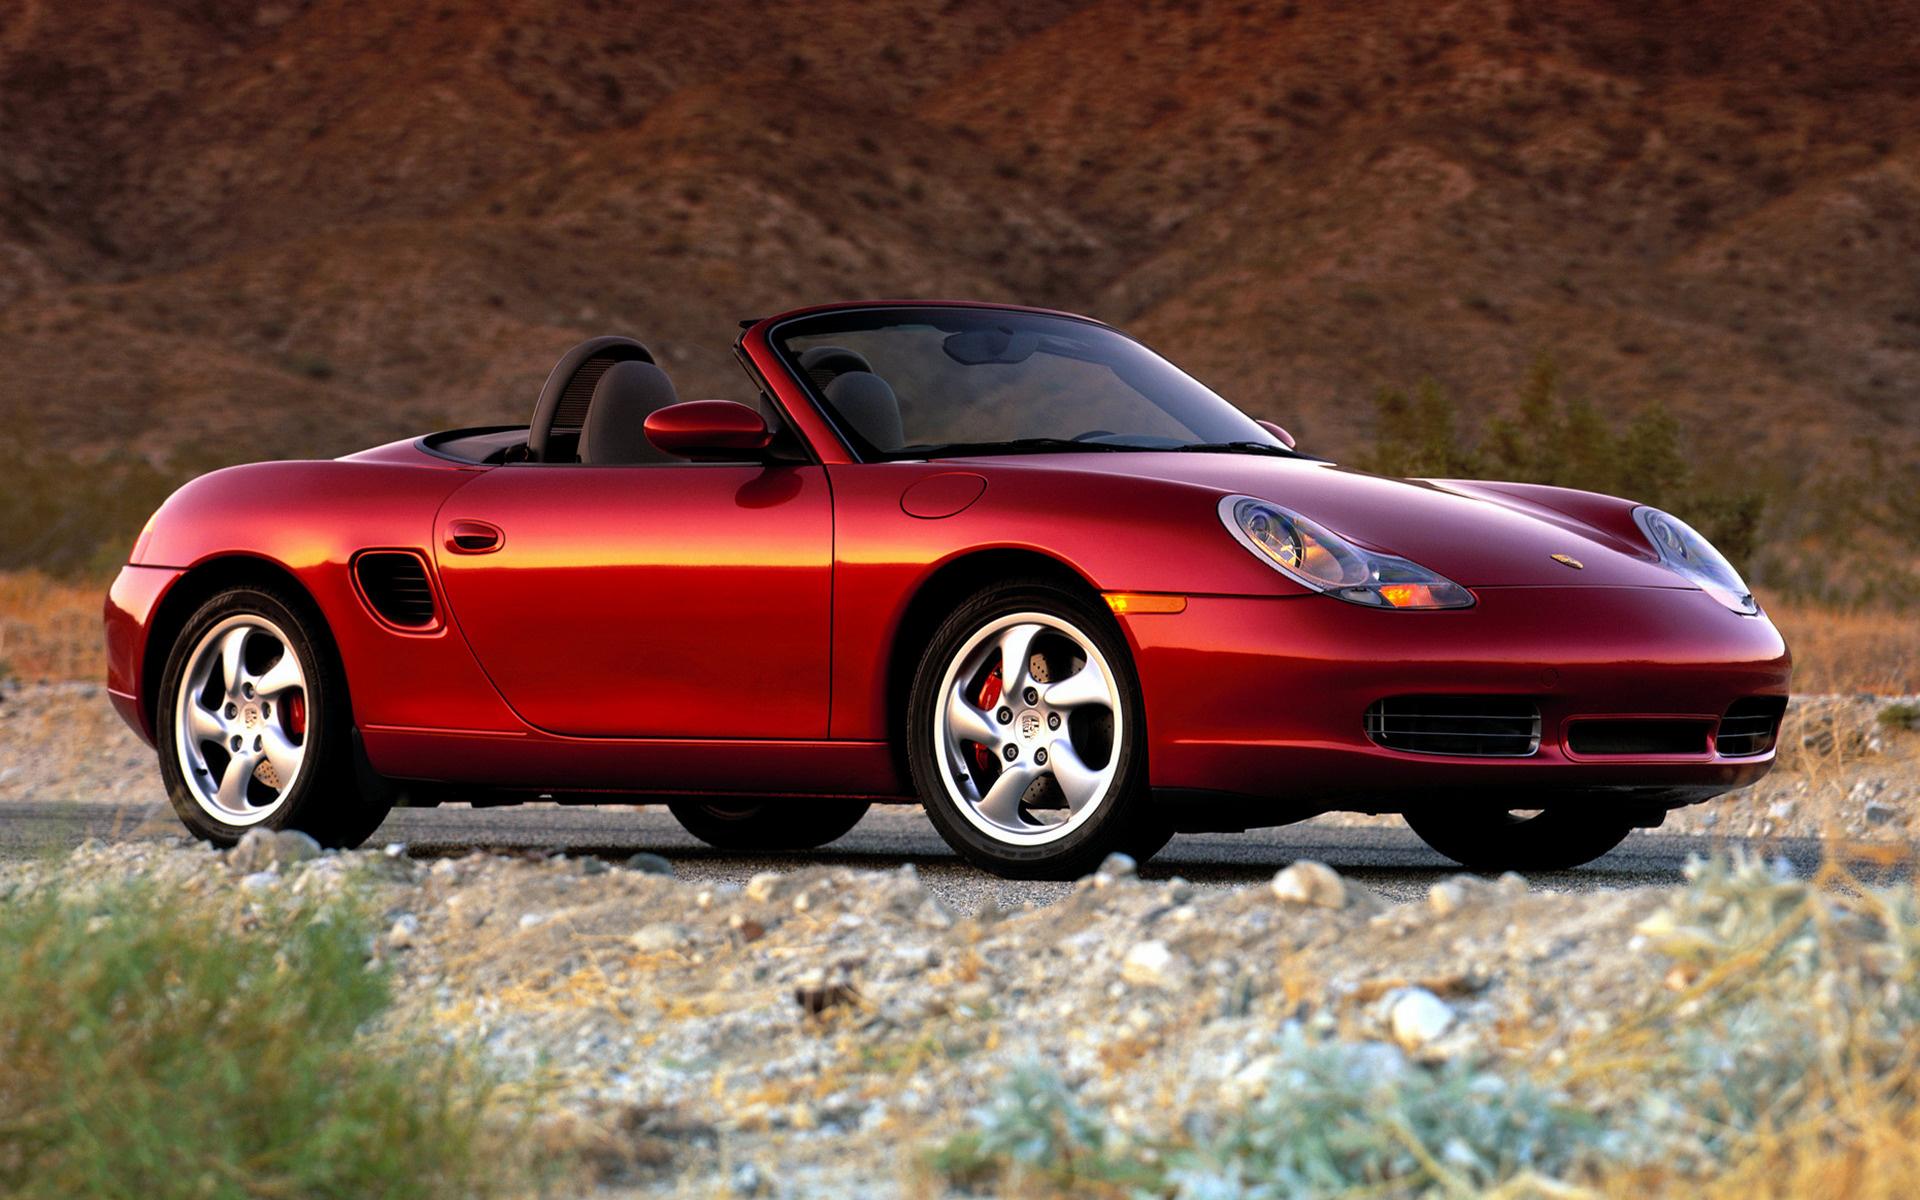 Porsche Boxster S (US) and HD Image